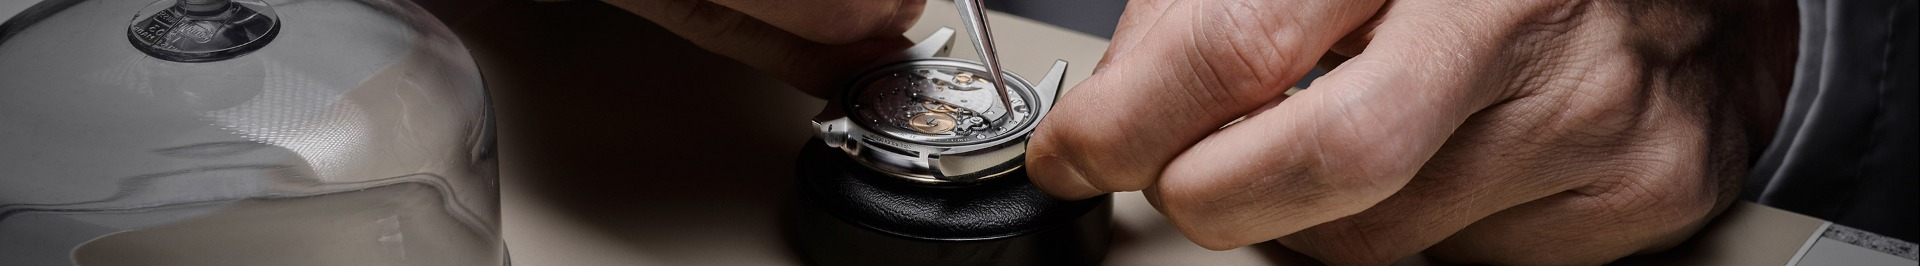 Servicing Your Rolex | Europe Watch Company